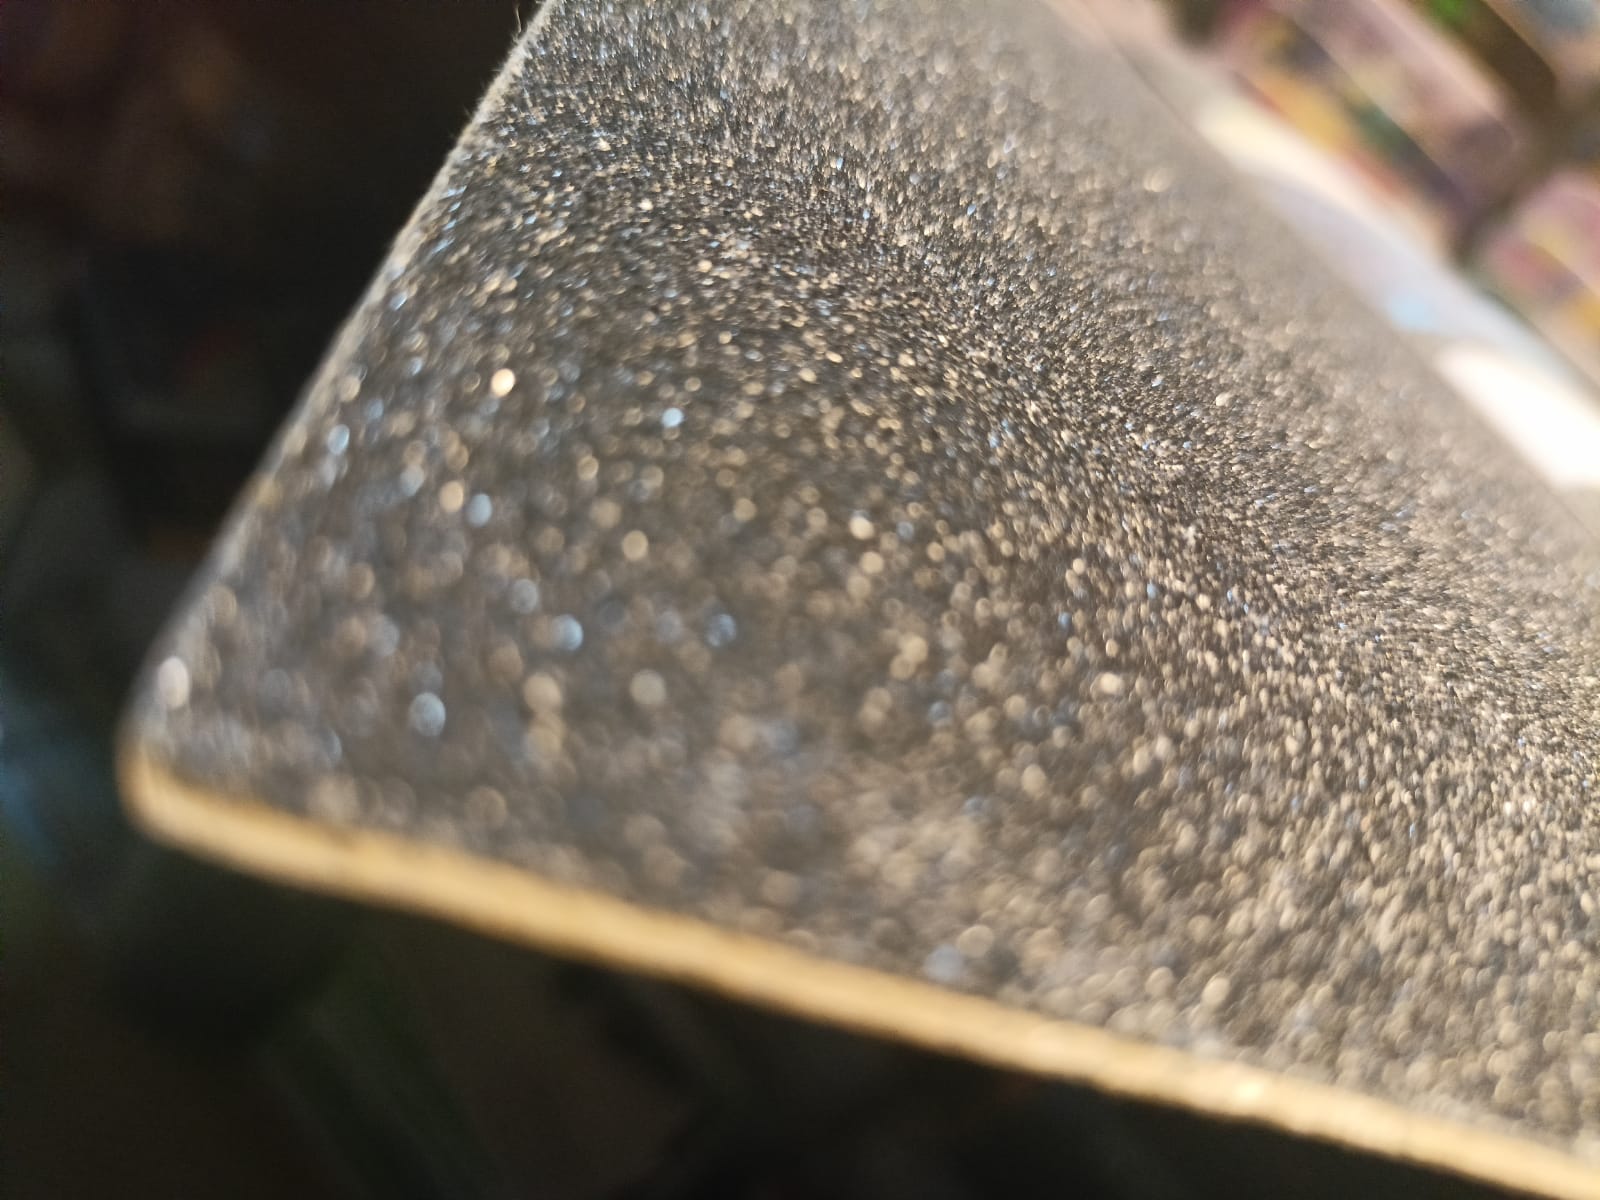 This grip tape comprises a solvent-based adhesive